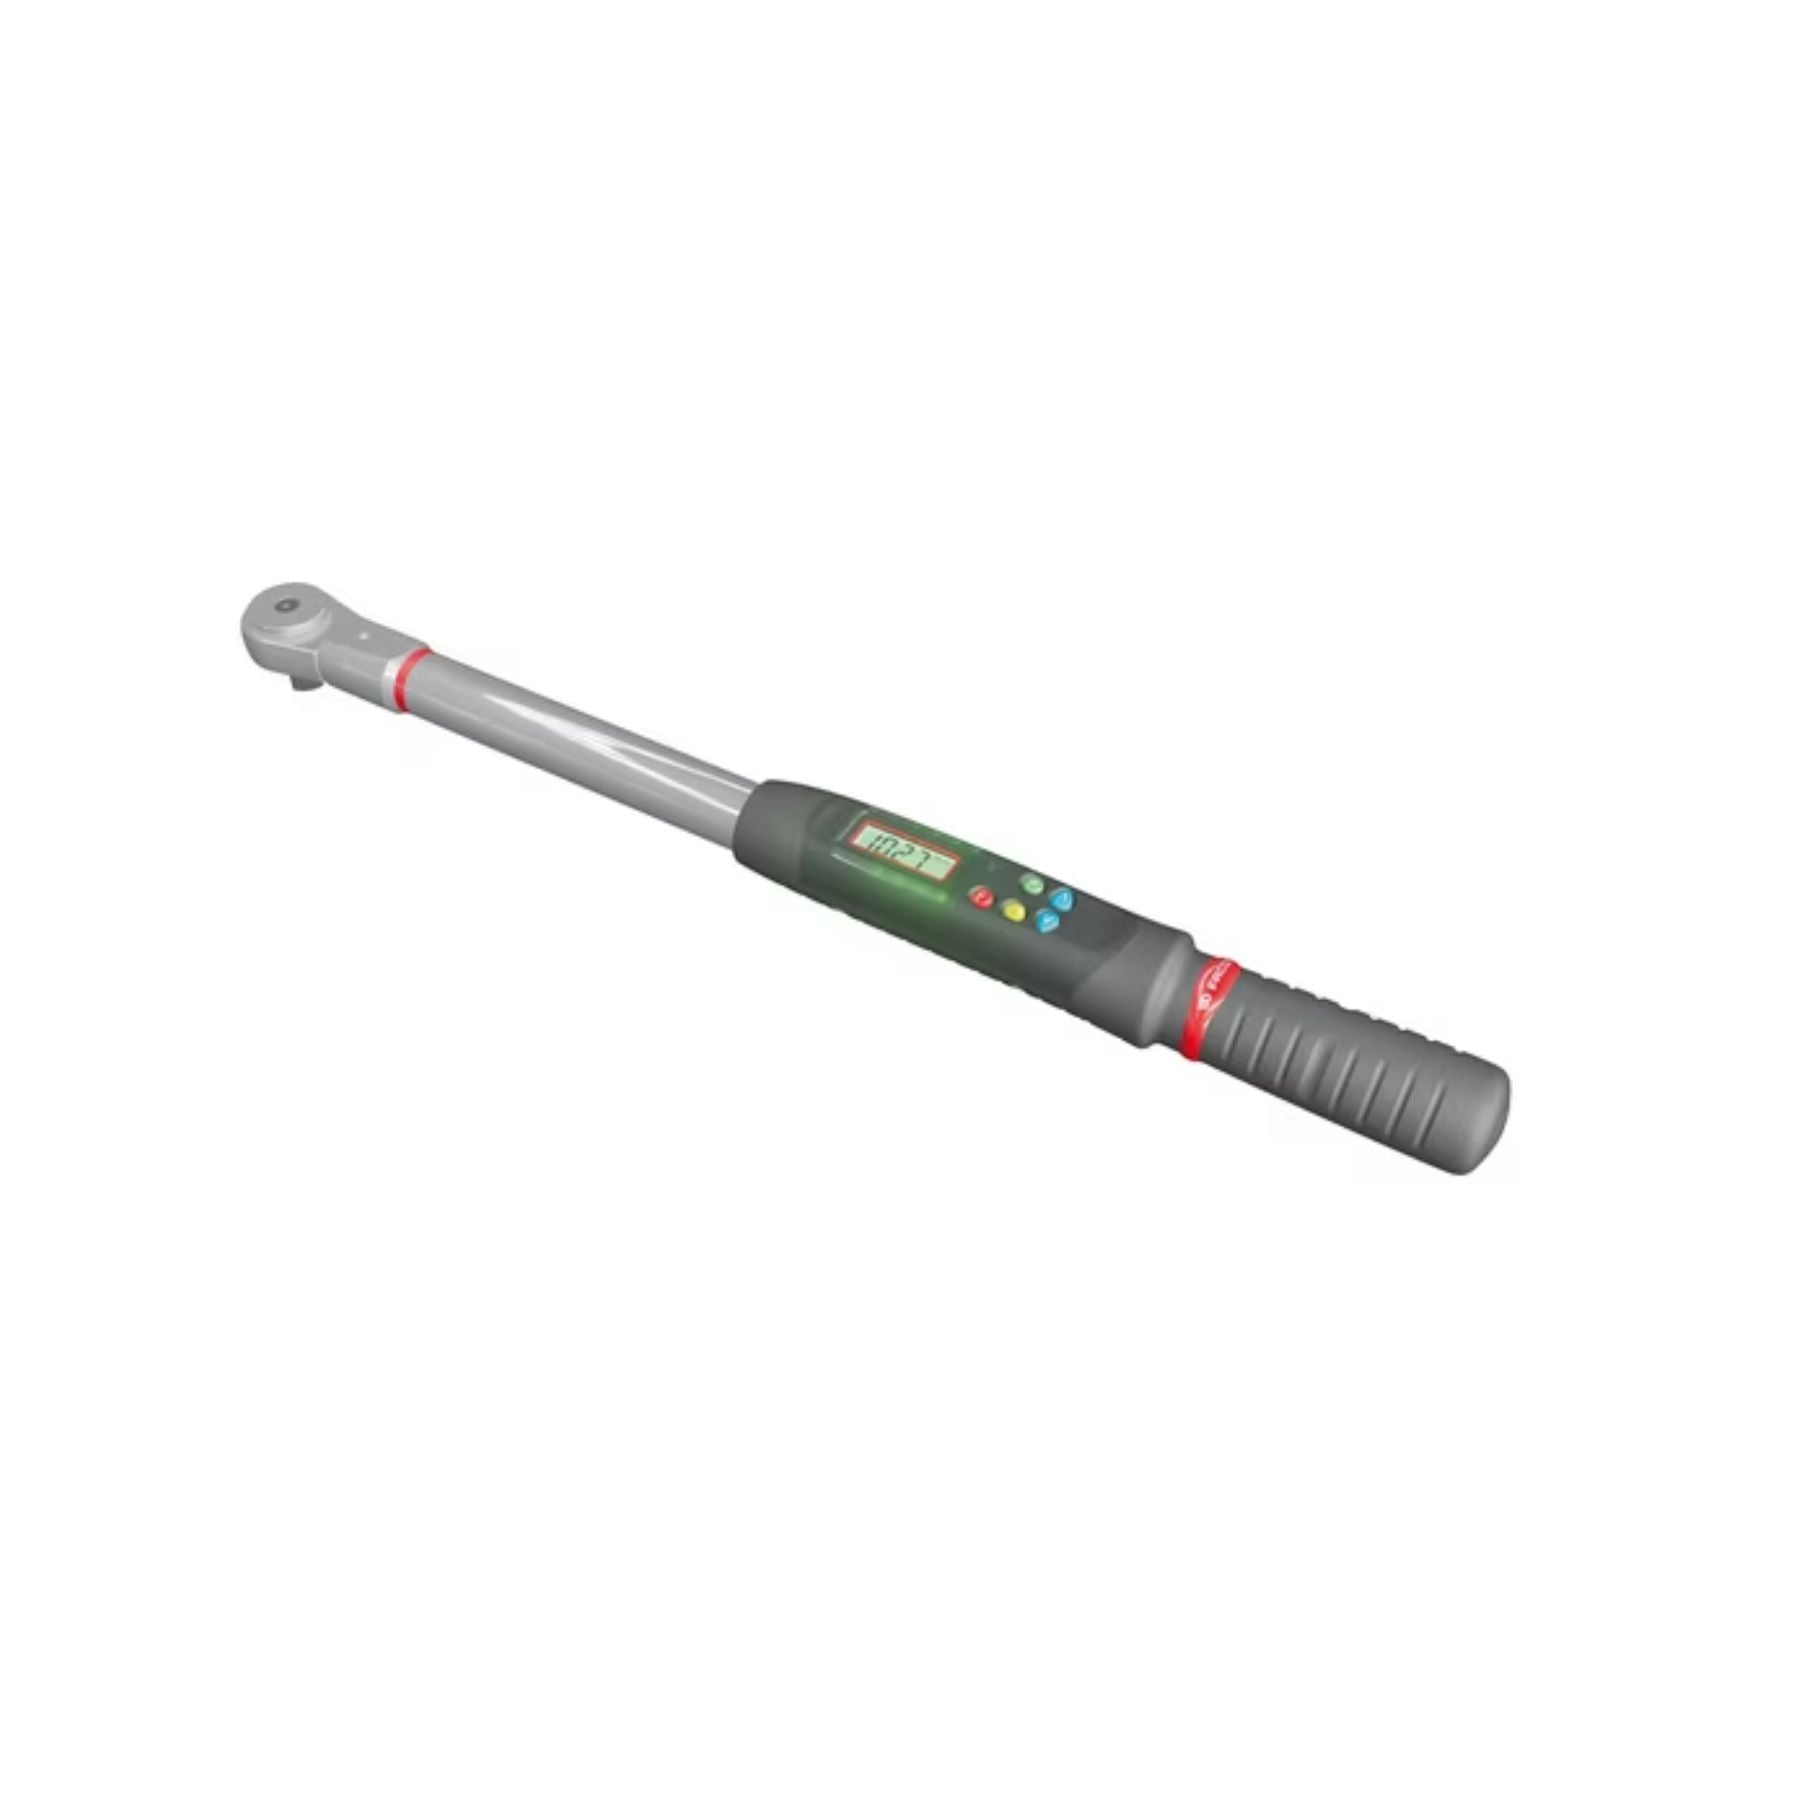 Facom E.306A135S Digital Electronic Torque wrenches with Ratchet, Capacity 6.7-135, Square 1/2